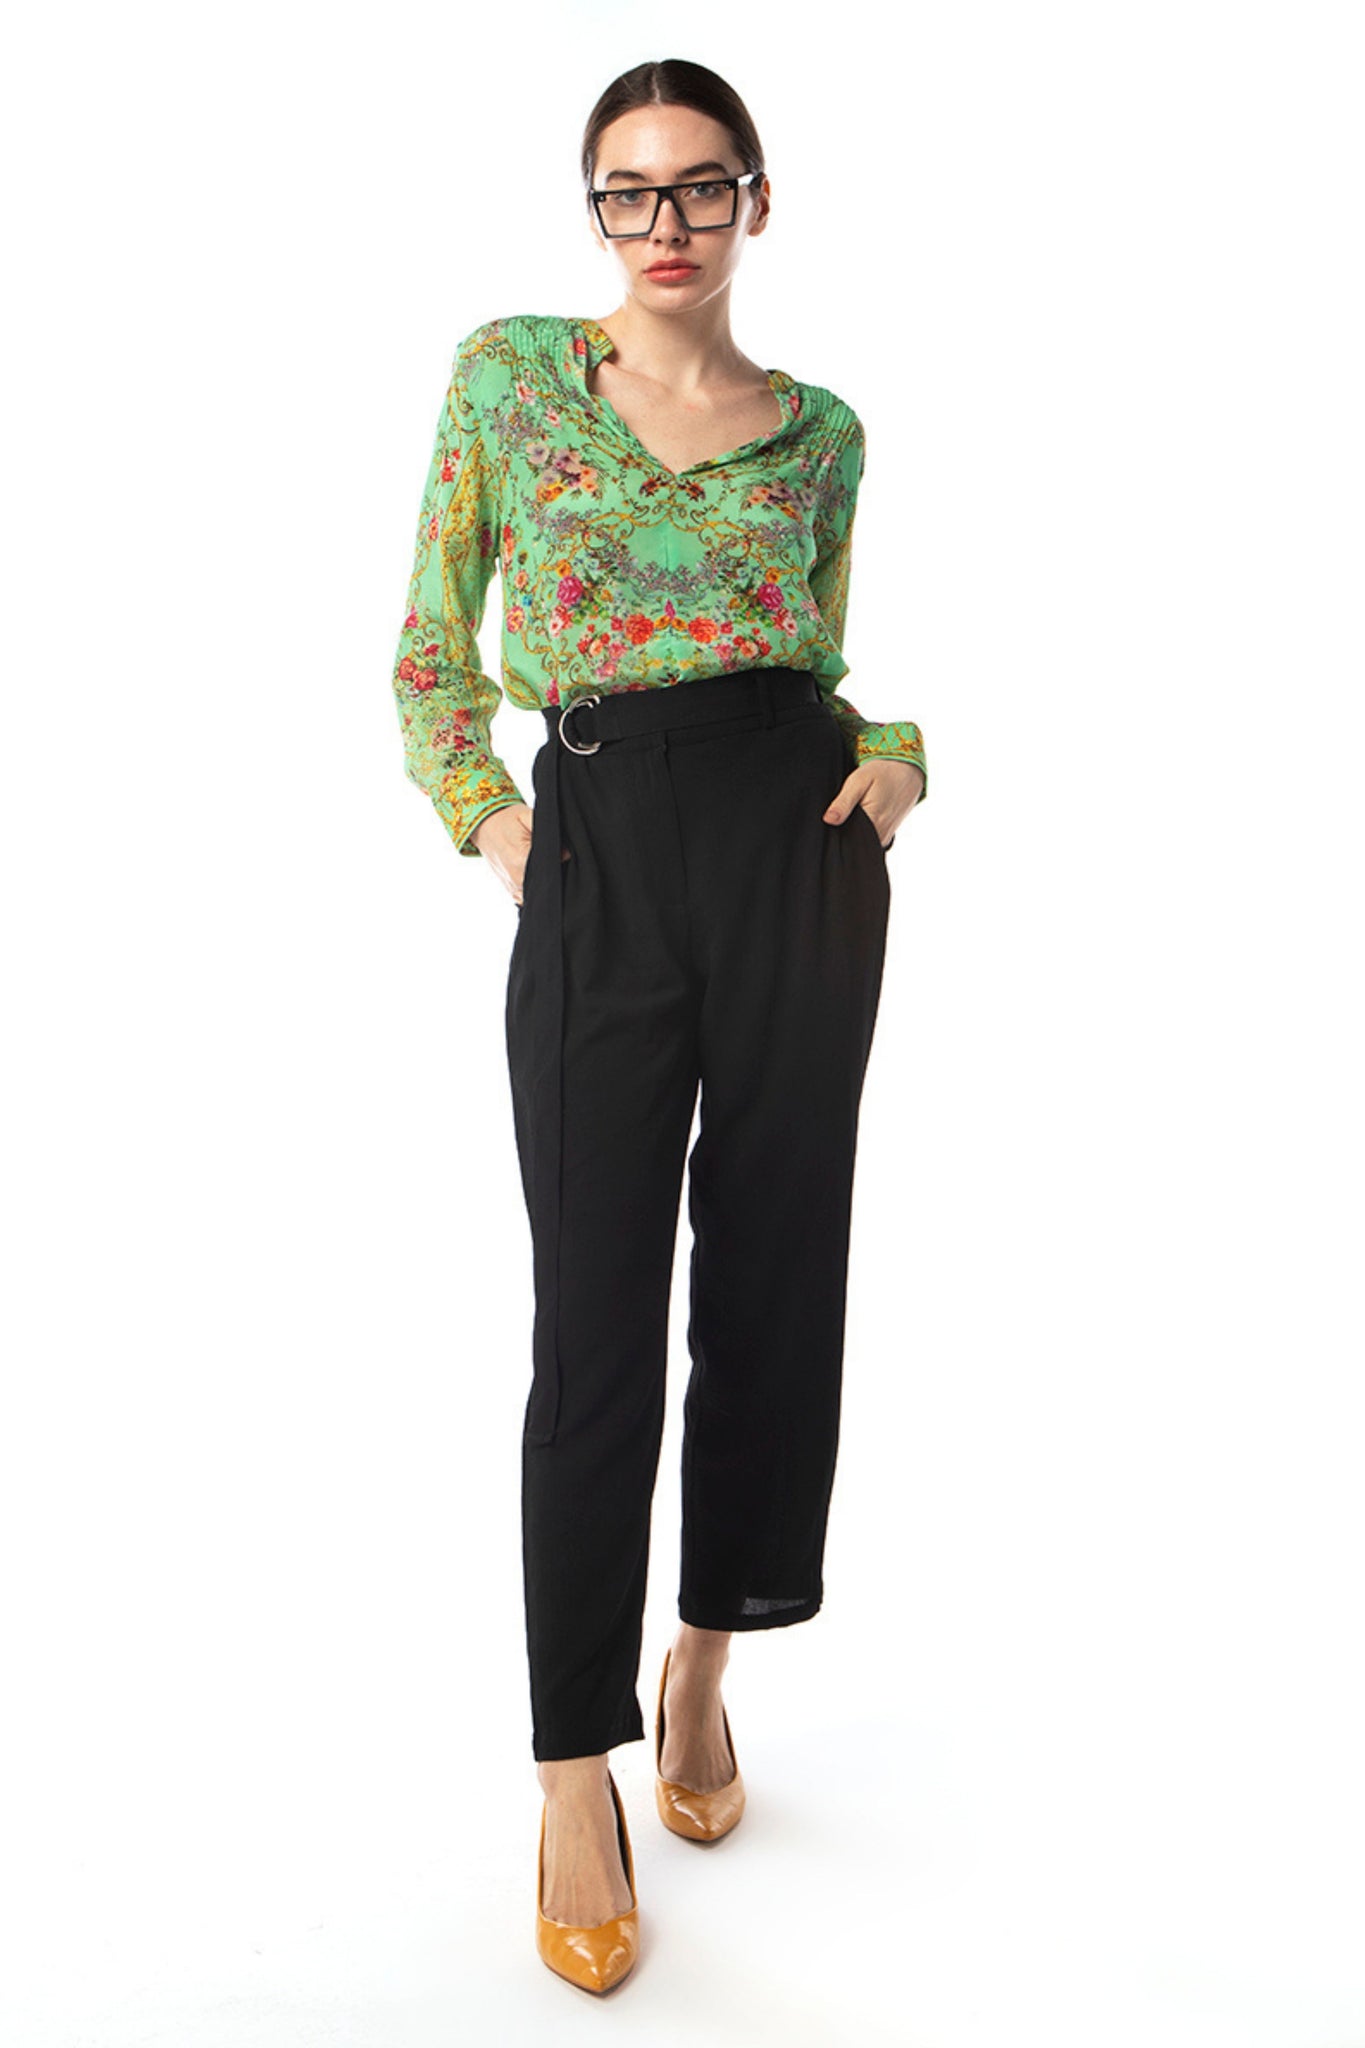 Buy Inoa Silk Blouson Pintuck Blouse in Chartreuse Green and Floral Print